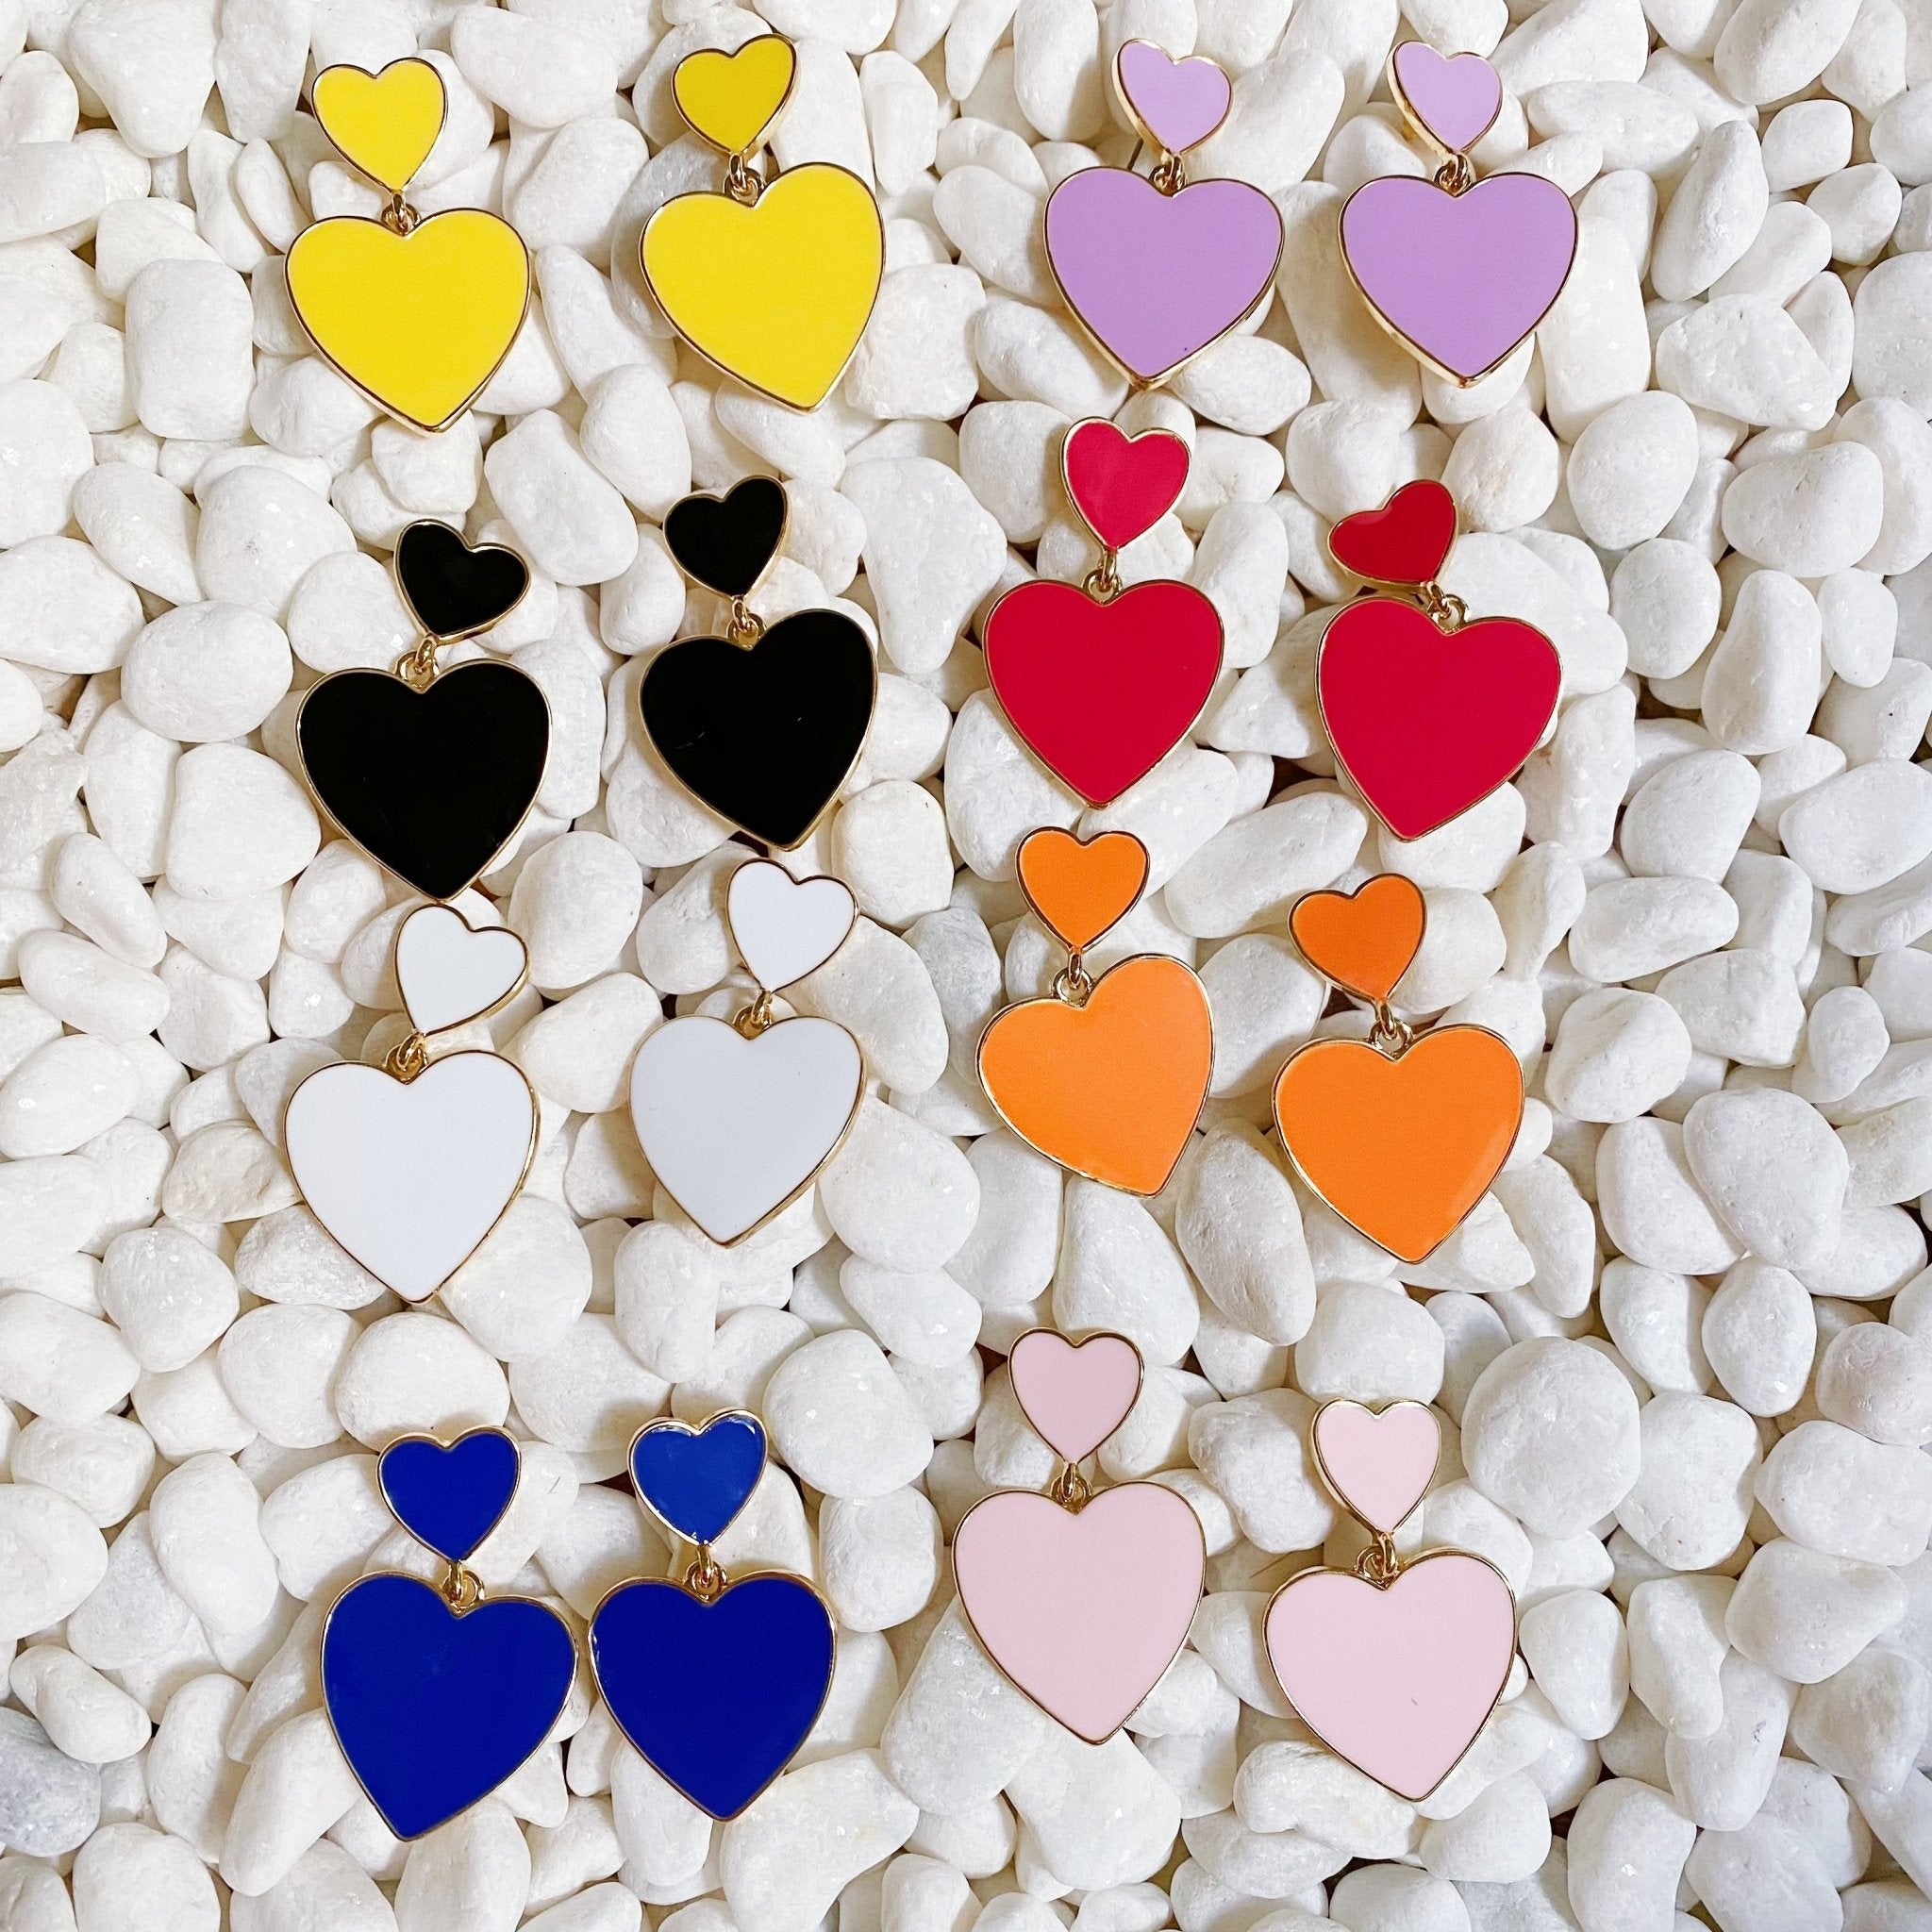 Heart For Game Day Earrings - The Kindness Cause